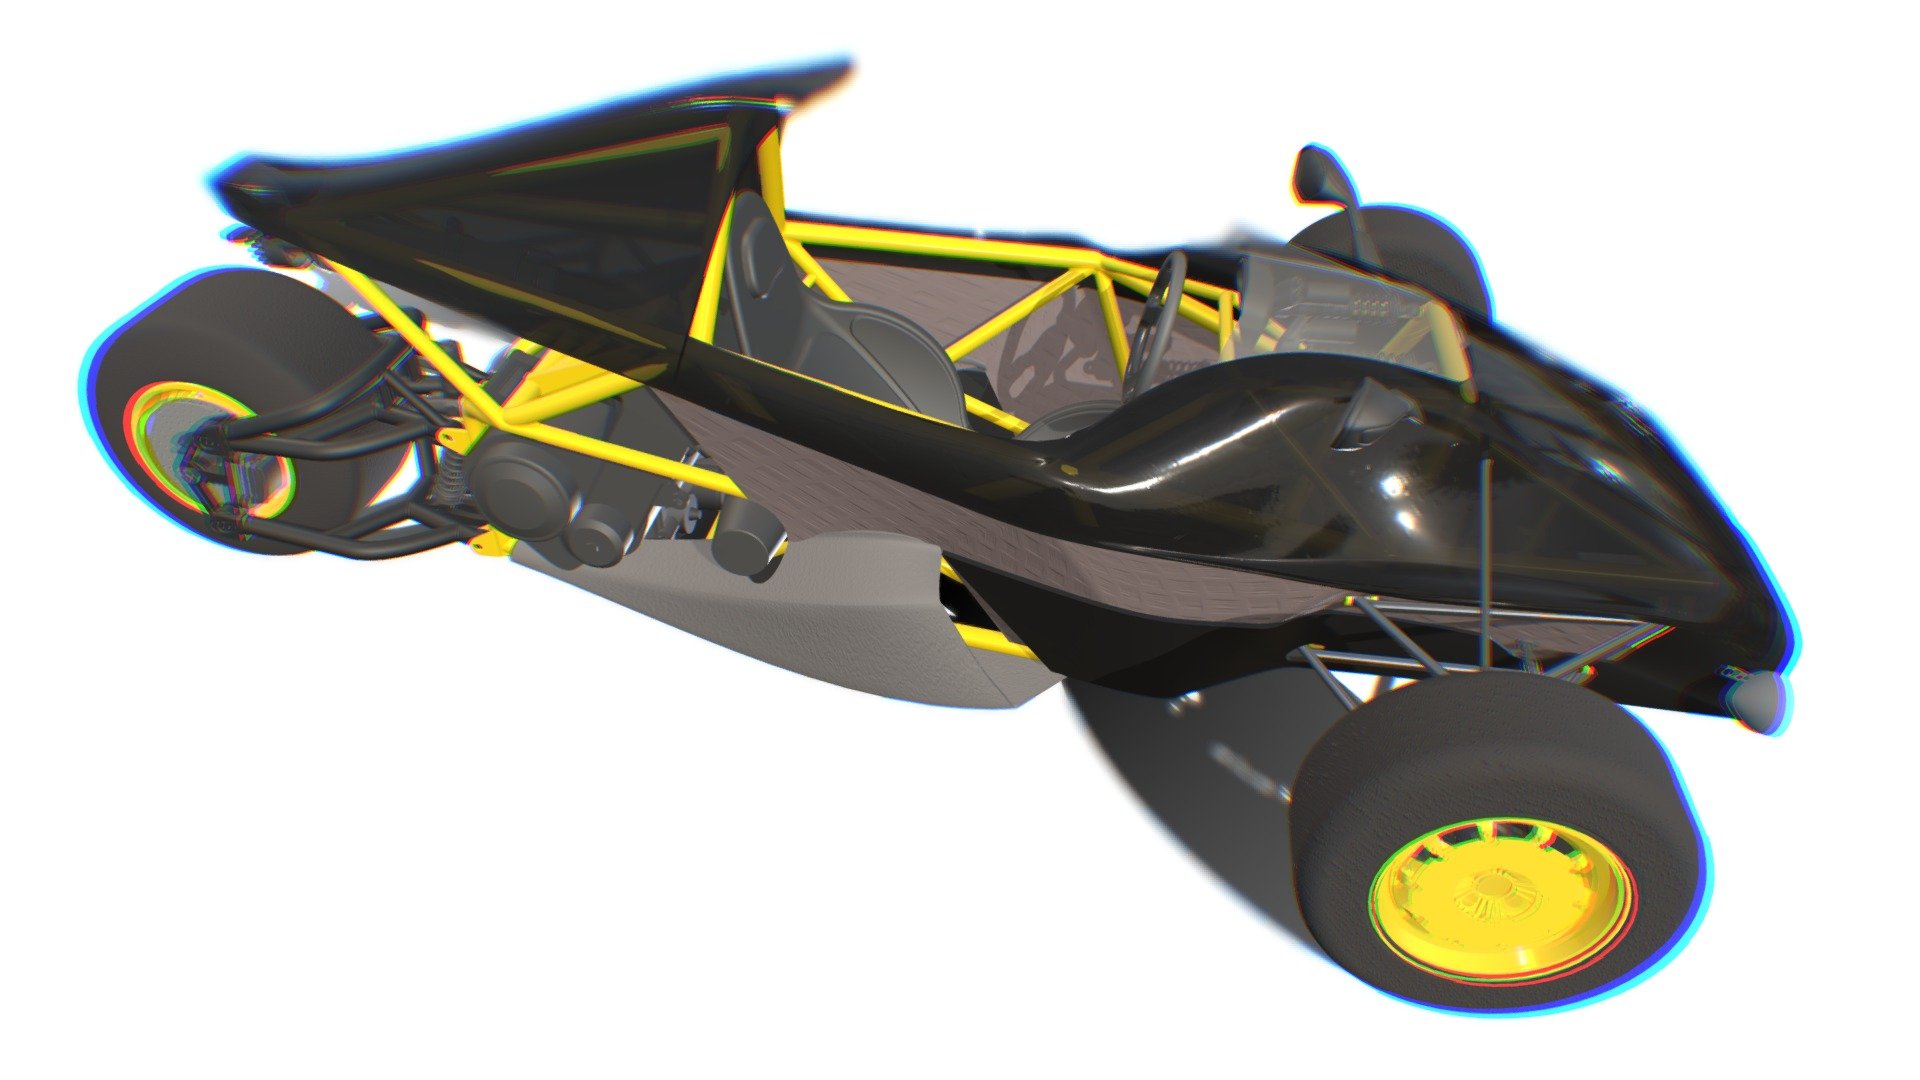 Darkside is a sport trike contest entry for a vehicle design competition: https://www.drksd.info/competition
It had a fresh brief and it is targeted to drivers that dare to be different.

I designed the bodywork, following a smooth and organic form, with aerodynamics and efficiency in mind. 
The design language had transparency in mind, partially covering the front 2/3 of the car, while the rear remains uncovered.

It expresses sportivity, lightweight and power.
I aimed for a construction from several parts, thus being easier to manufacture, repair, or customise.
The bodypanels are made of carbonfiber vacuumed on molds 3d model